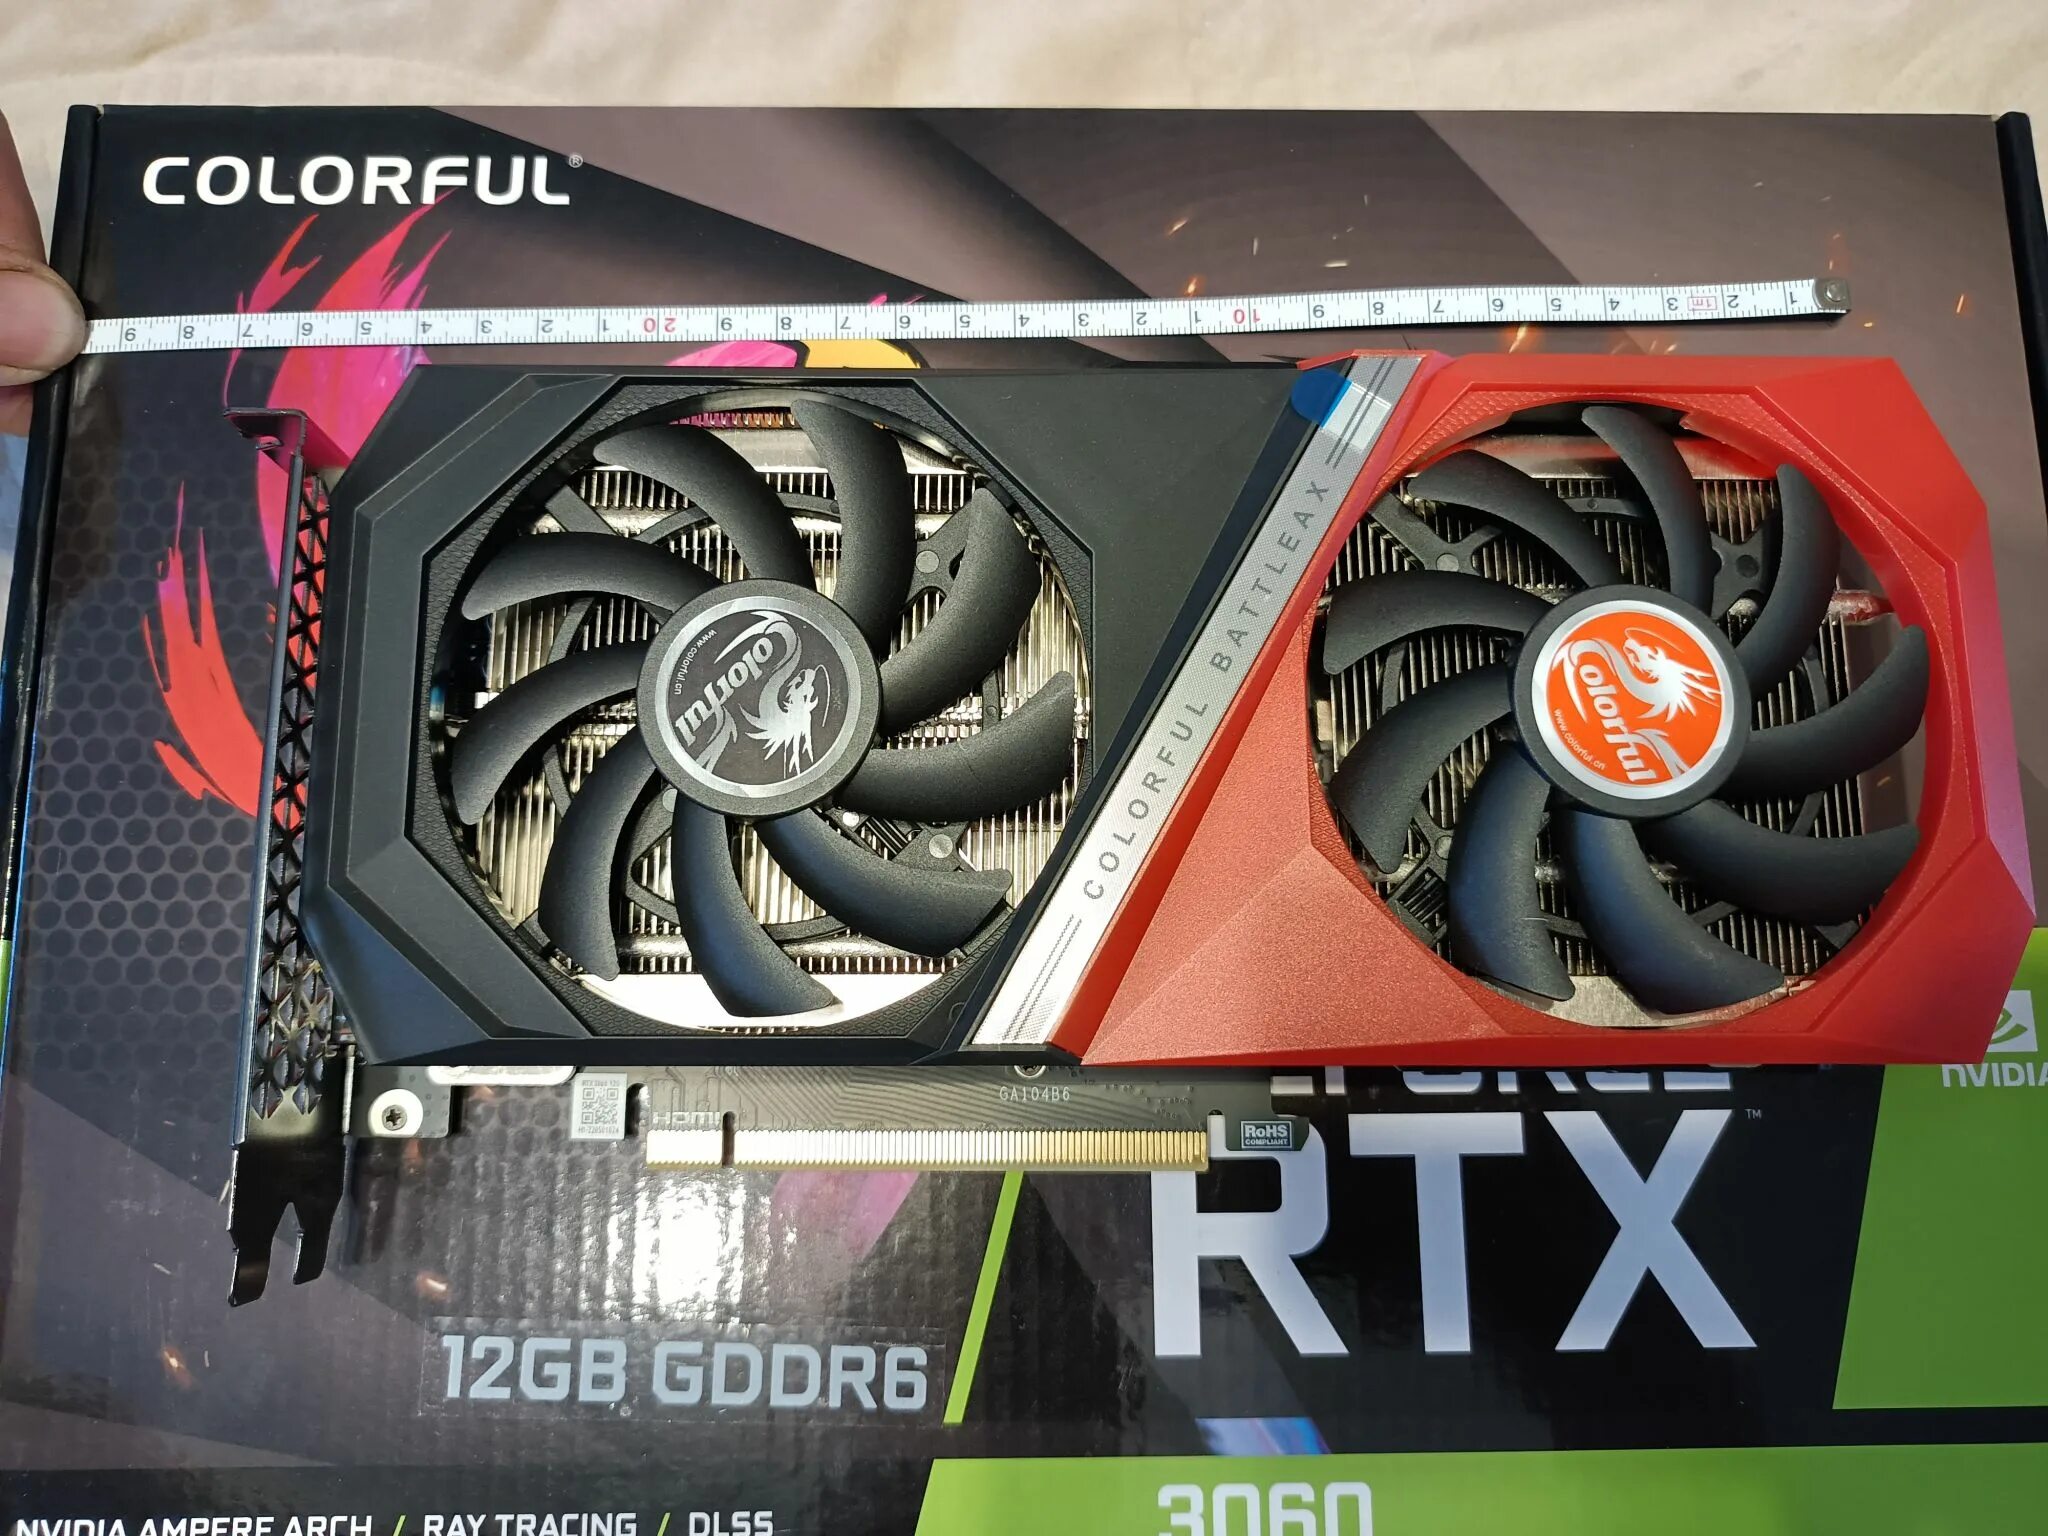 RTX 3060 NB Duo 12g v2 l-v. RTX 3060 colorful NB Duo 12g. Colorful GEFORCE RTX 3060 NB Duo. Colorful rtx3060 NB Duo 12g v2. Colorful rtx 4060 nb duo